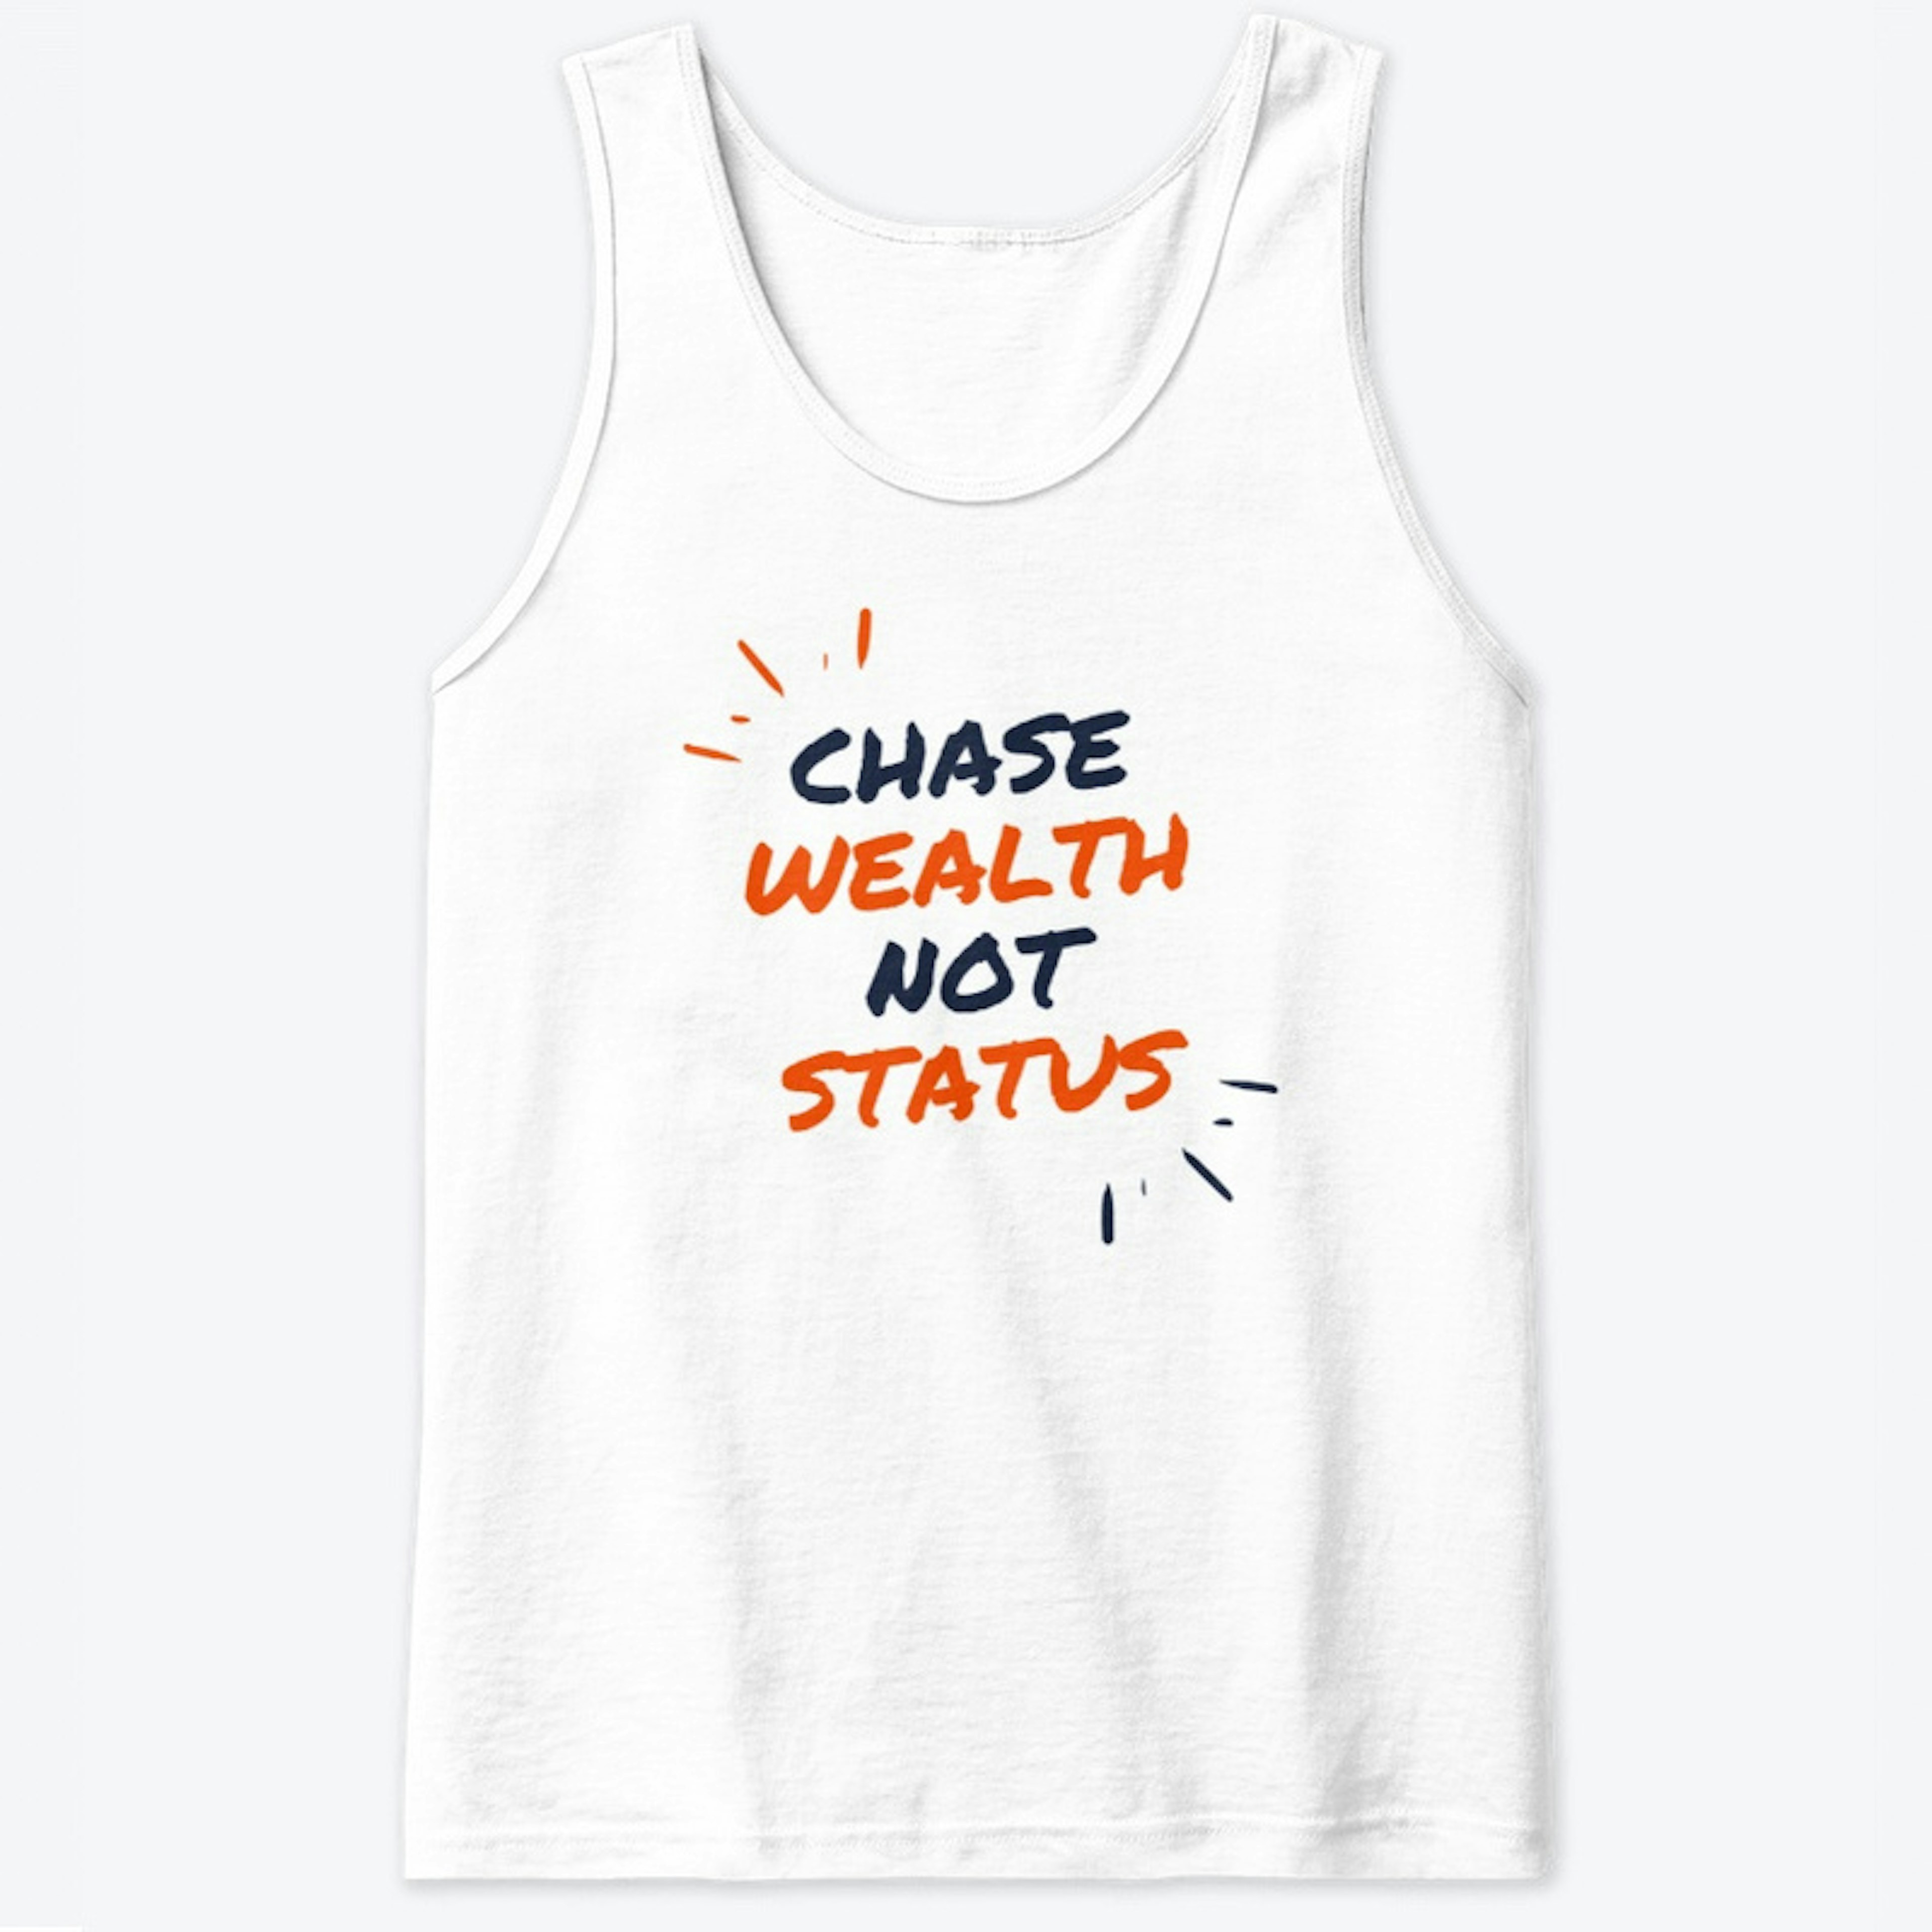 Chase wealth not status T shirt